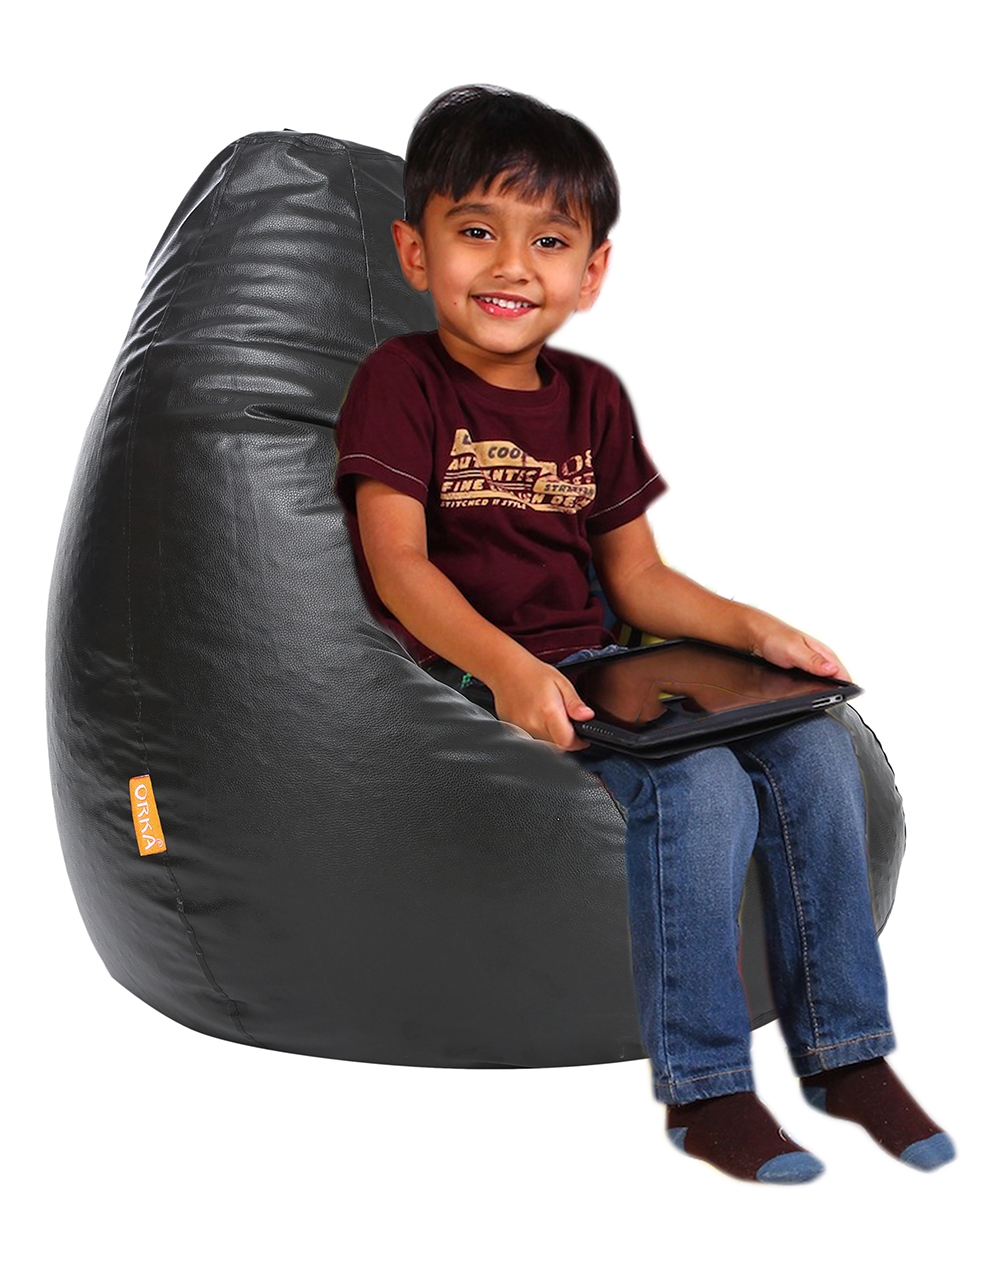 ORKA Classic Black Bean Bag With Matching Footstool Kids Bean Bag Cover ...